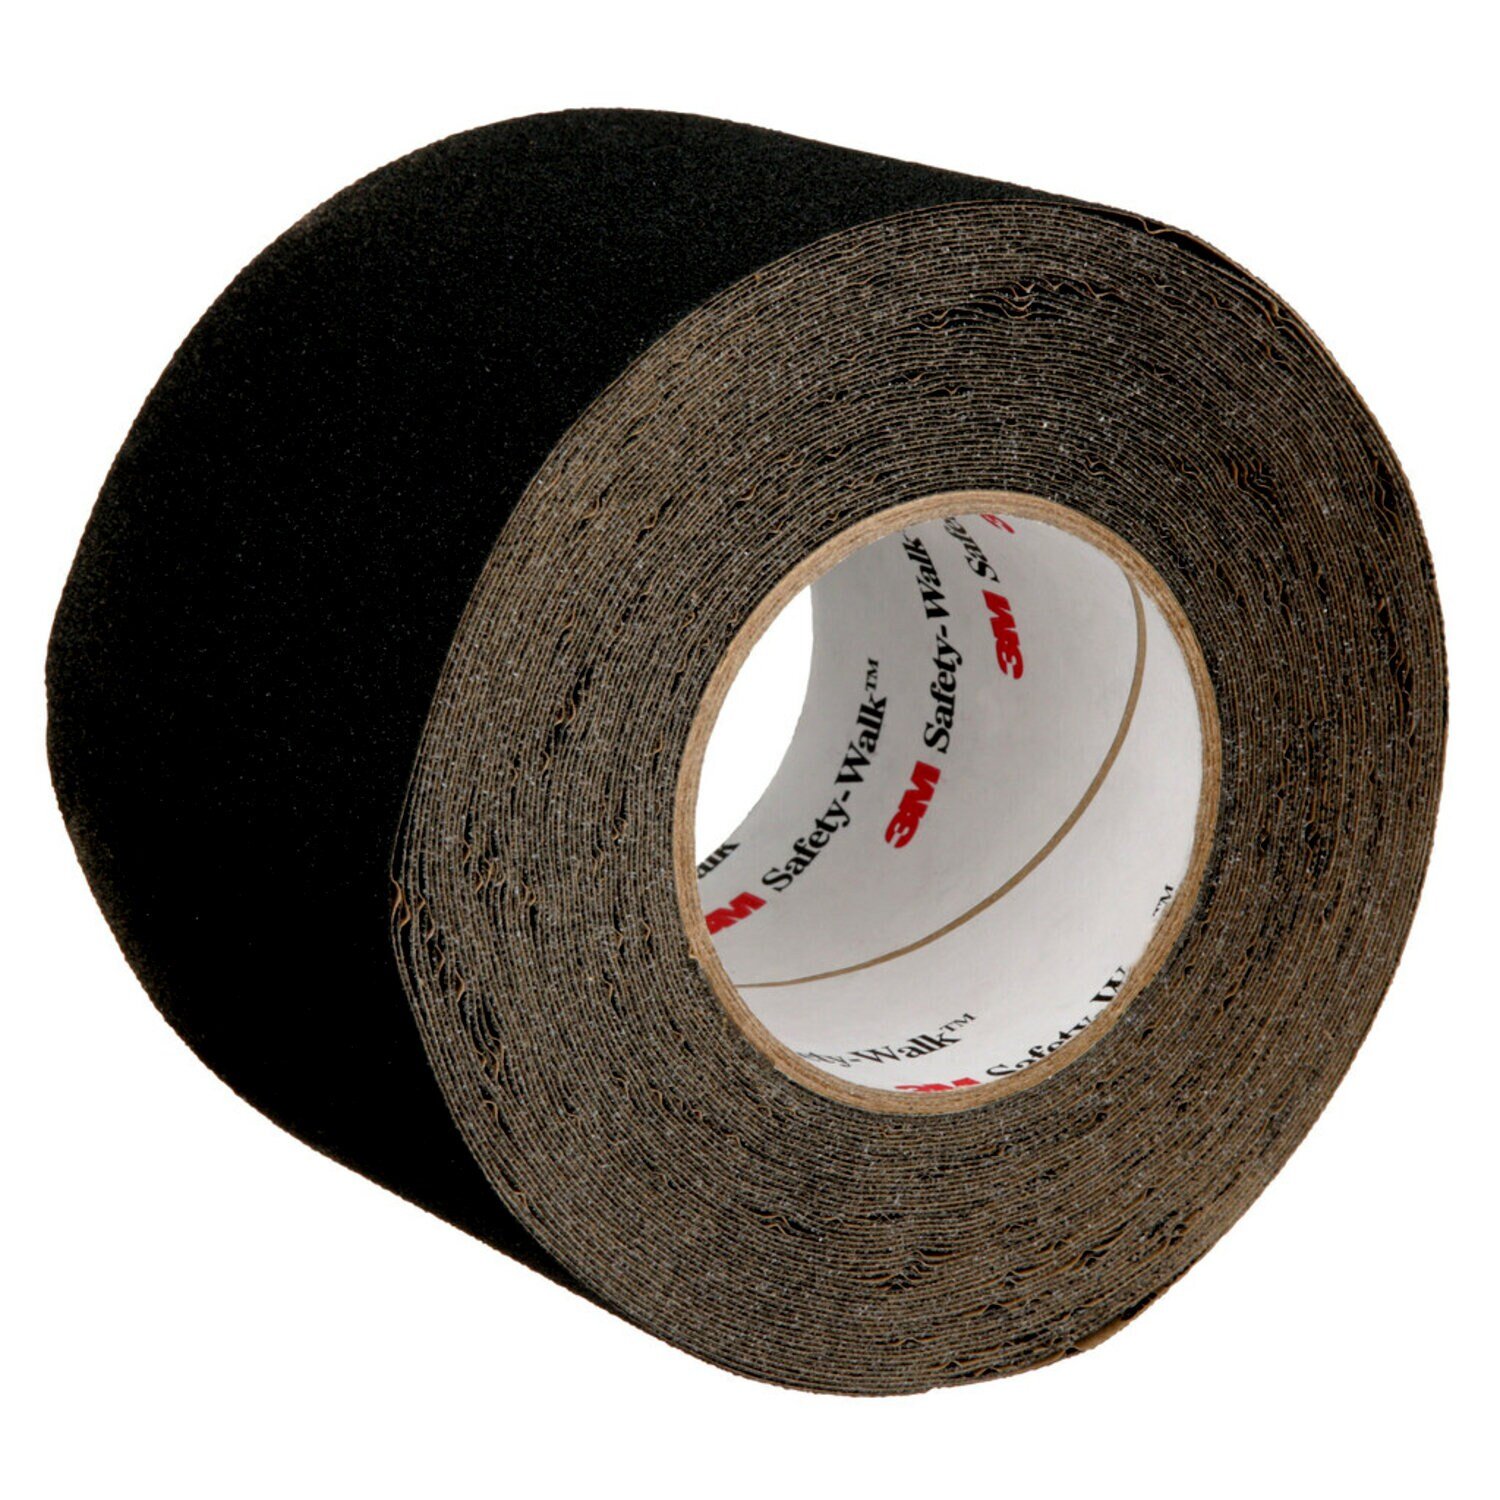 7100020921 - 3M Safety-Walk Slip-Resistant General Purpose Tapes & Treads 610,
Black, 4 in x 60 ft, Roll, 1/Case